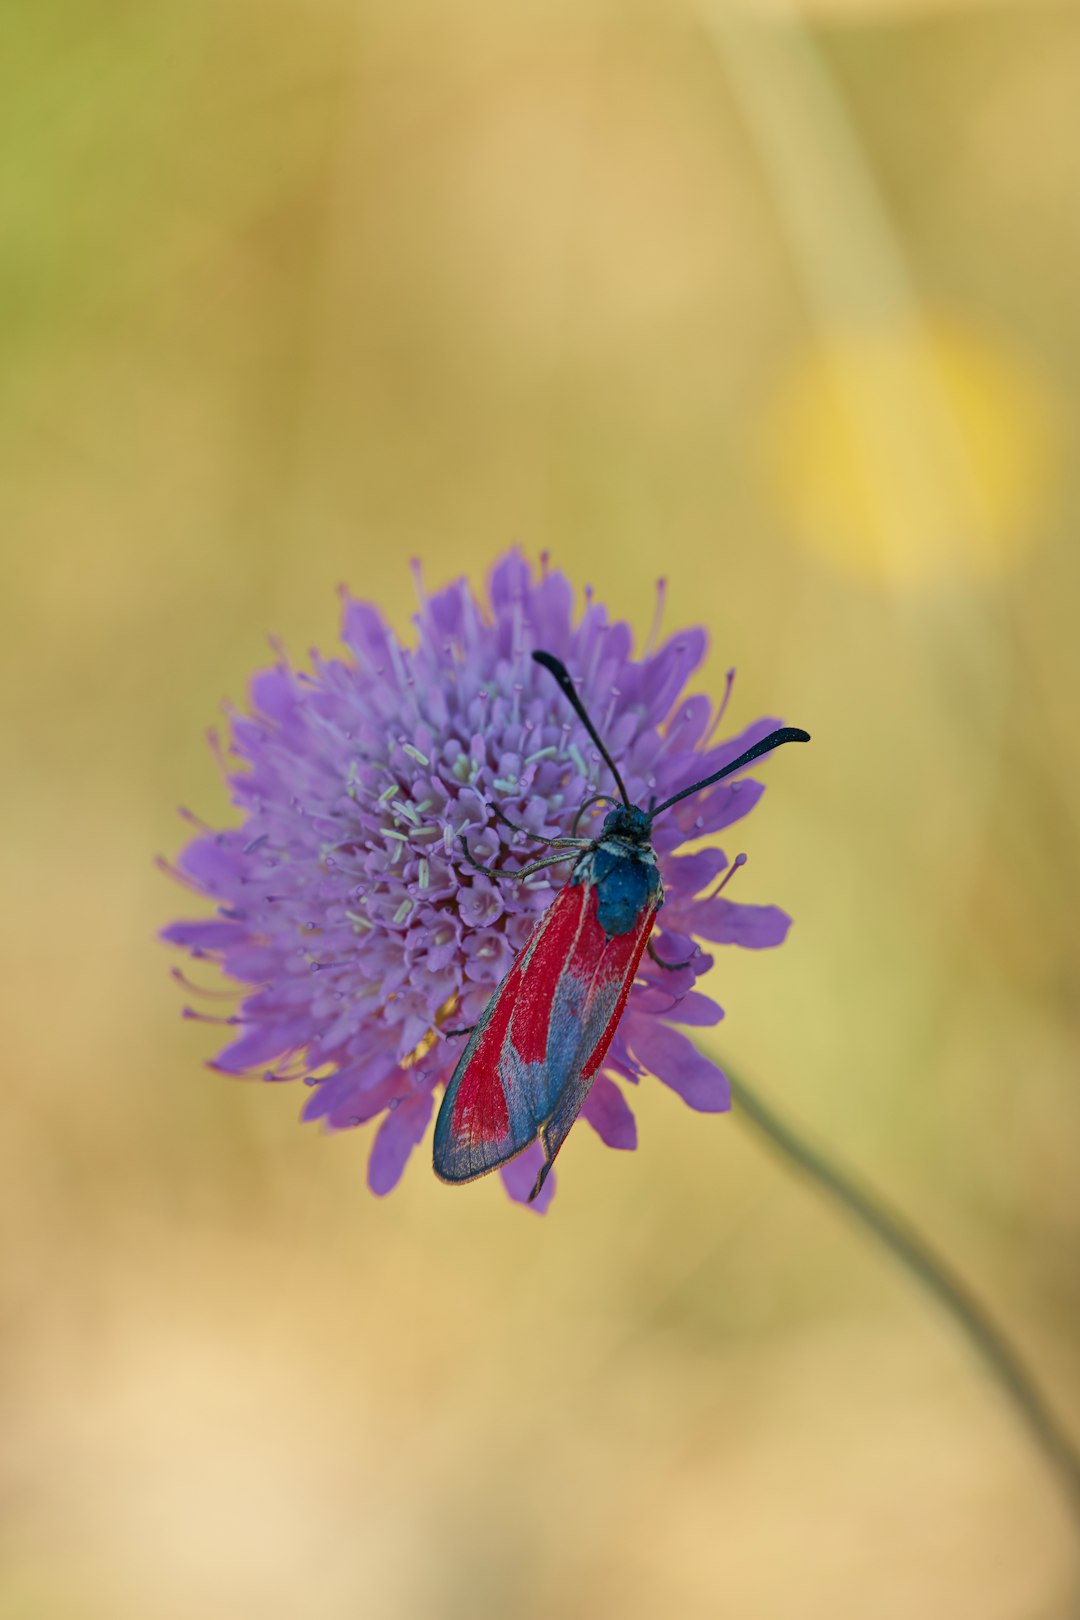 macro photography of red and blue insect on purple daisy flower